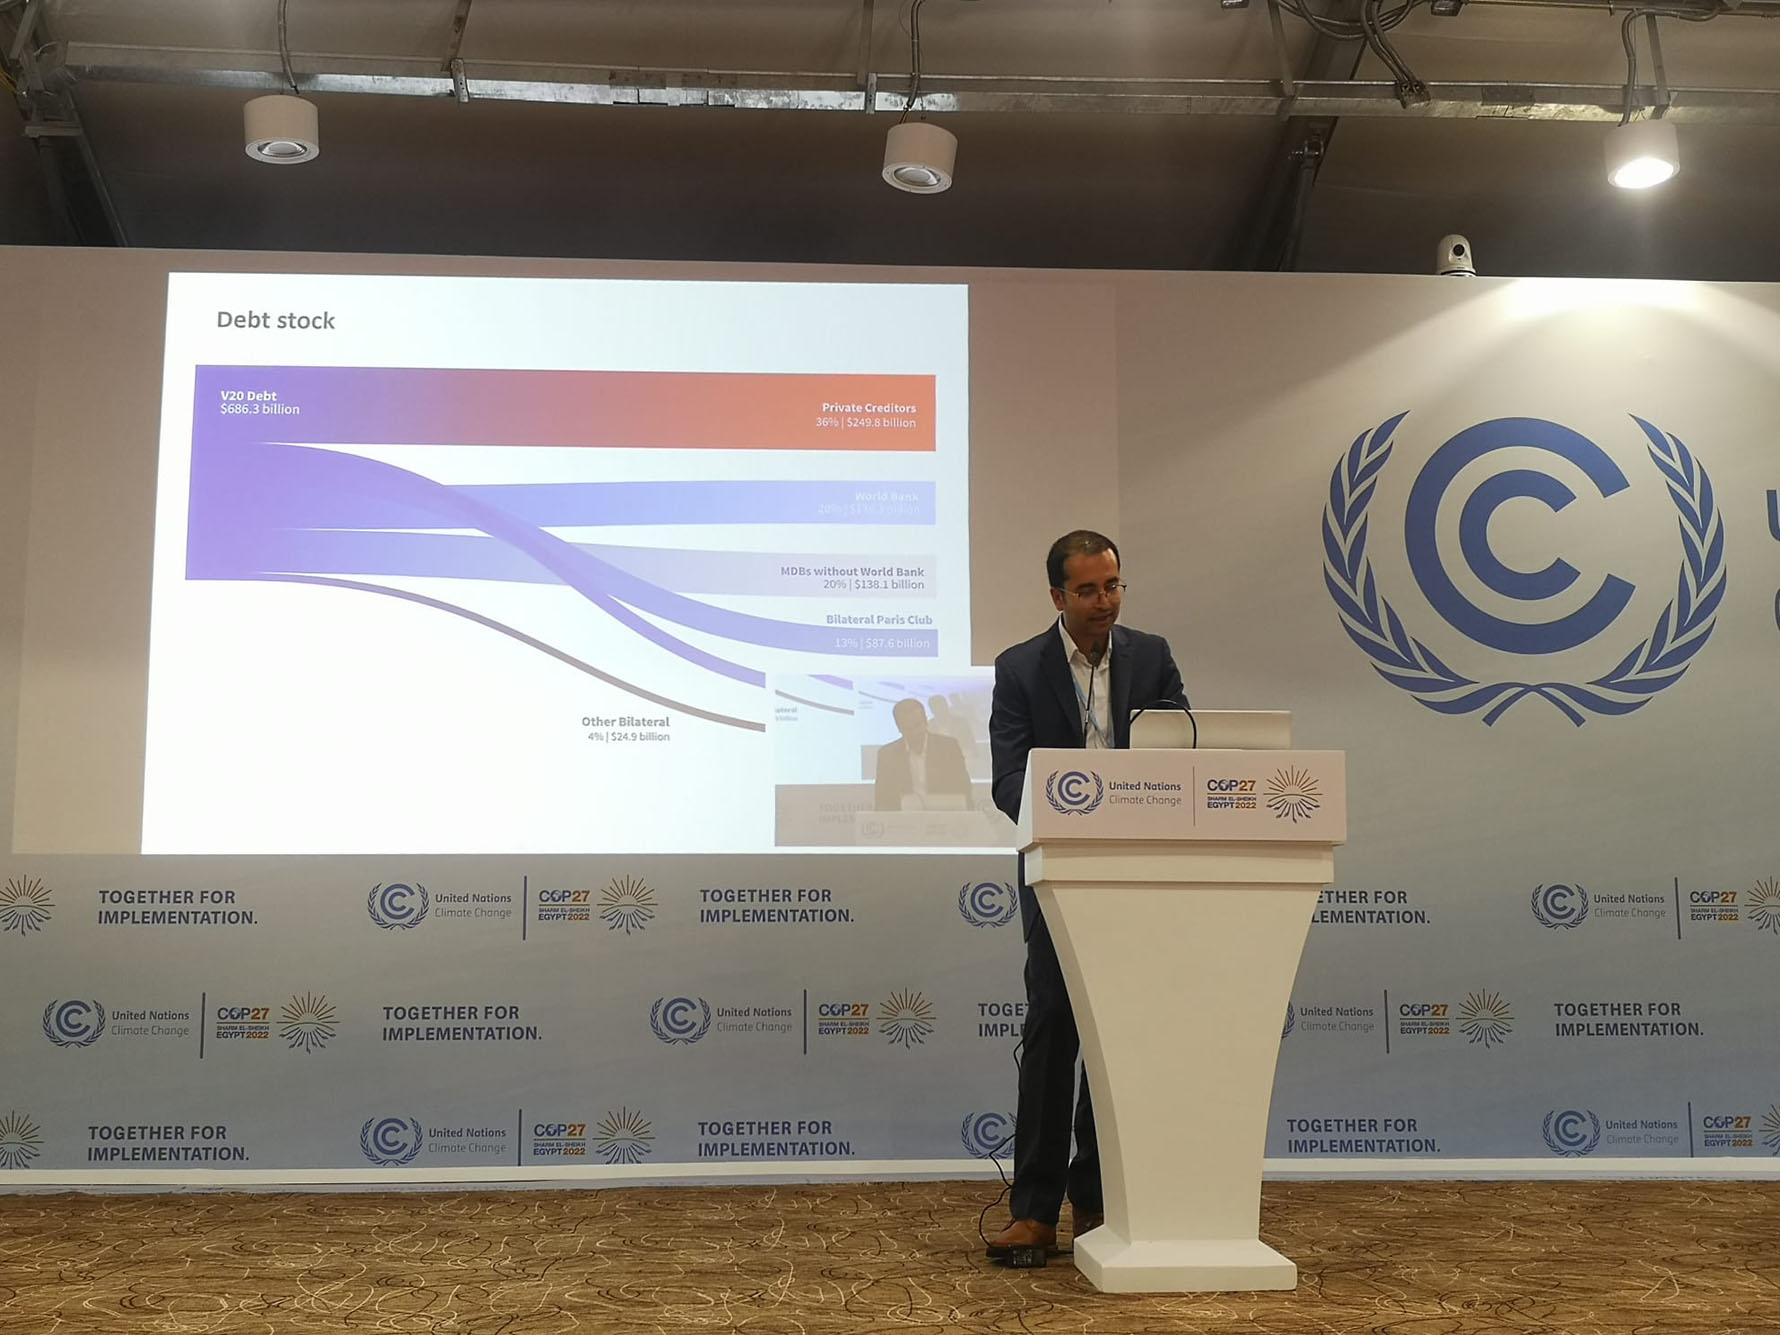 Photo: Rishikesh Ram Bhandary discusses the relationship between debt and climate change at COP27. A brown man wearing a black suit ensemble stands on a large stage and speaks at a white podium. A projector shows a graph behind him.